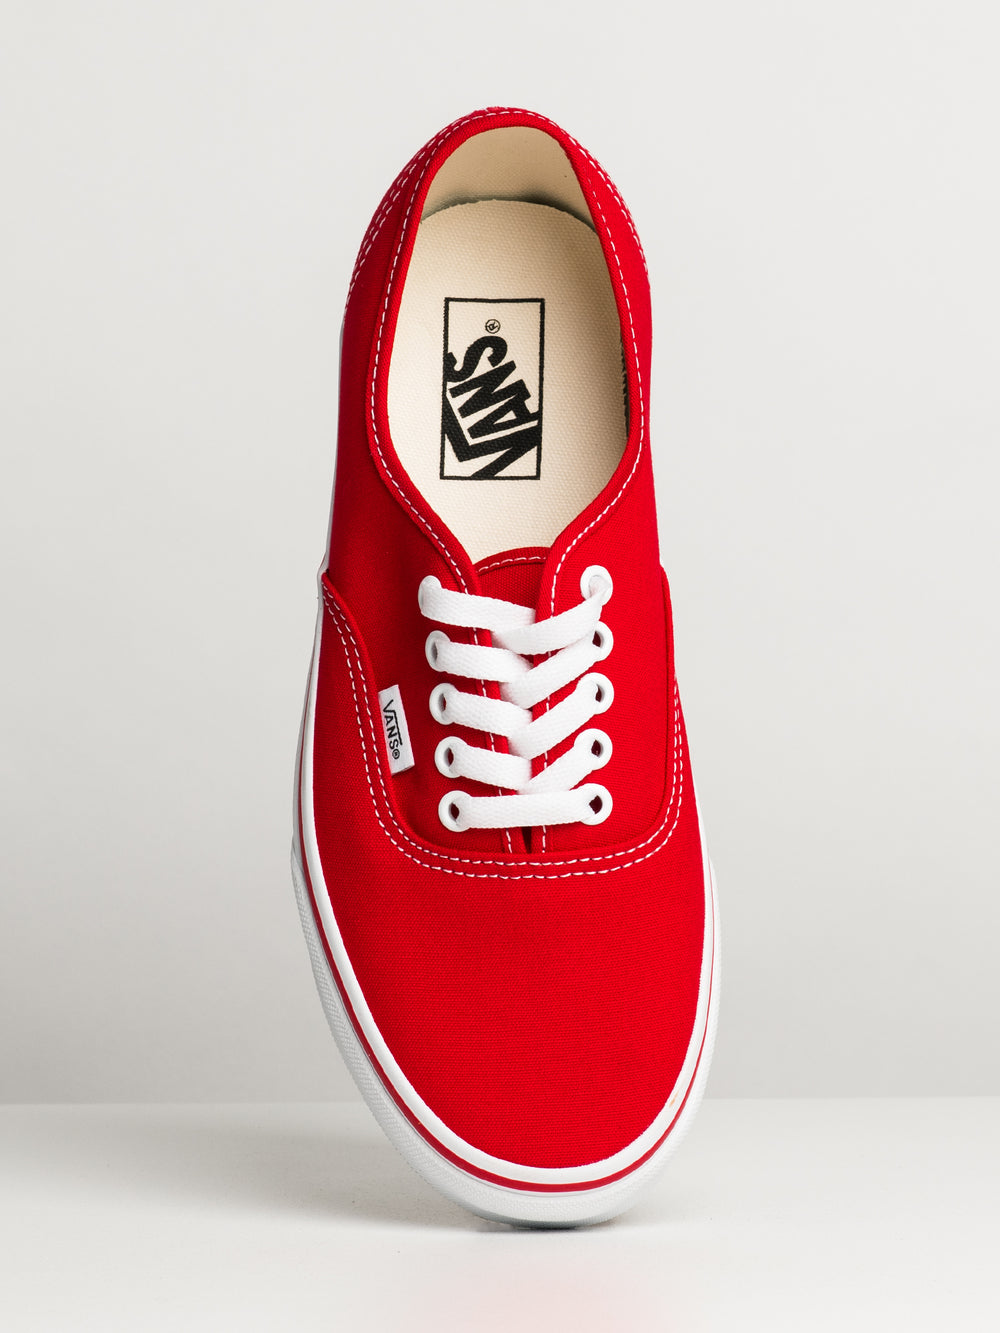 MENS VANS AUTHENTIC RED CANVAS SHOES - CLEARANCE